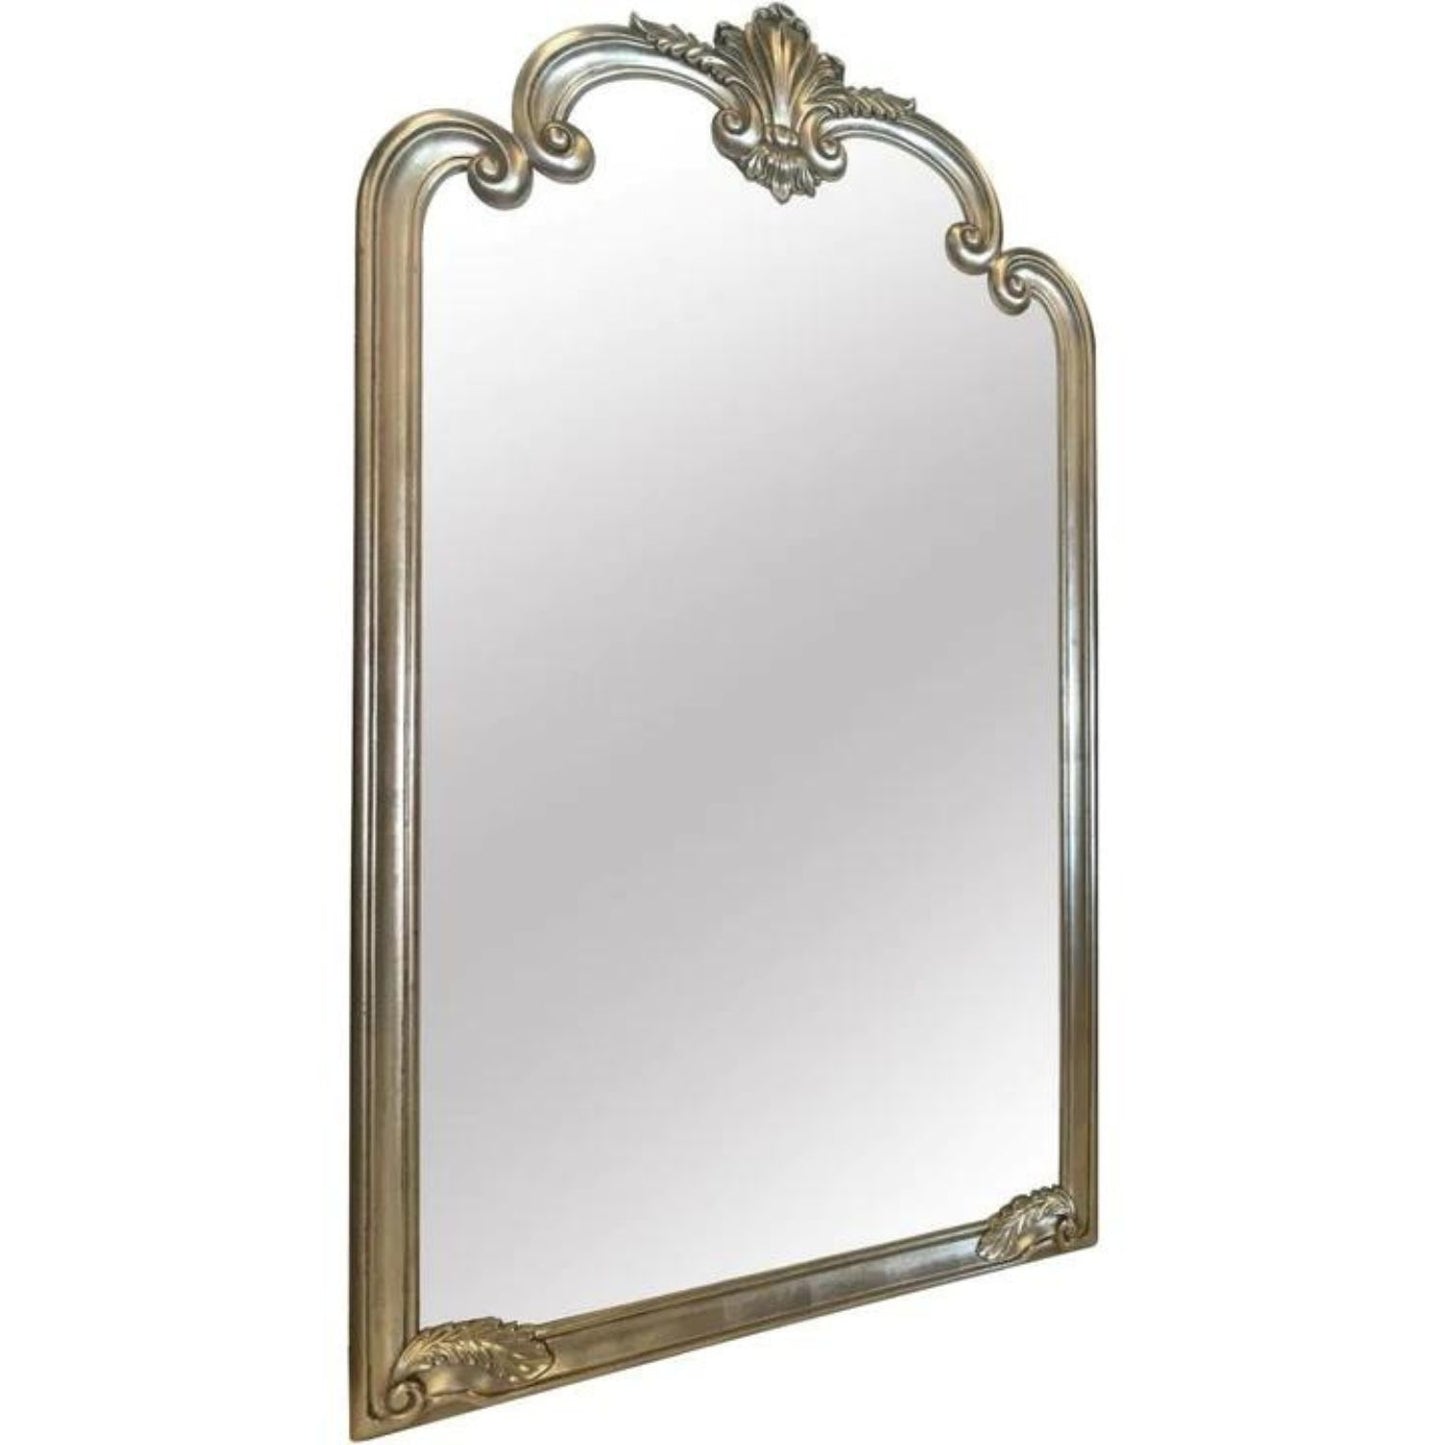 Silver-Finished Oak Leaner Mirror with Ornate Detailing 184x104cm